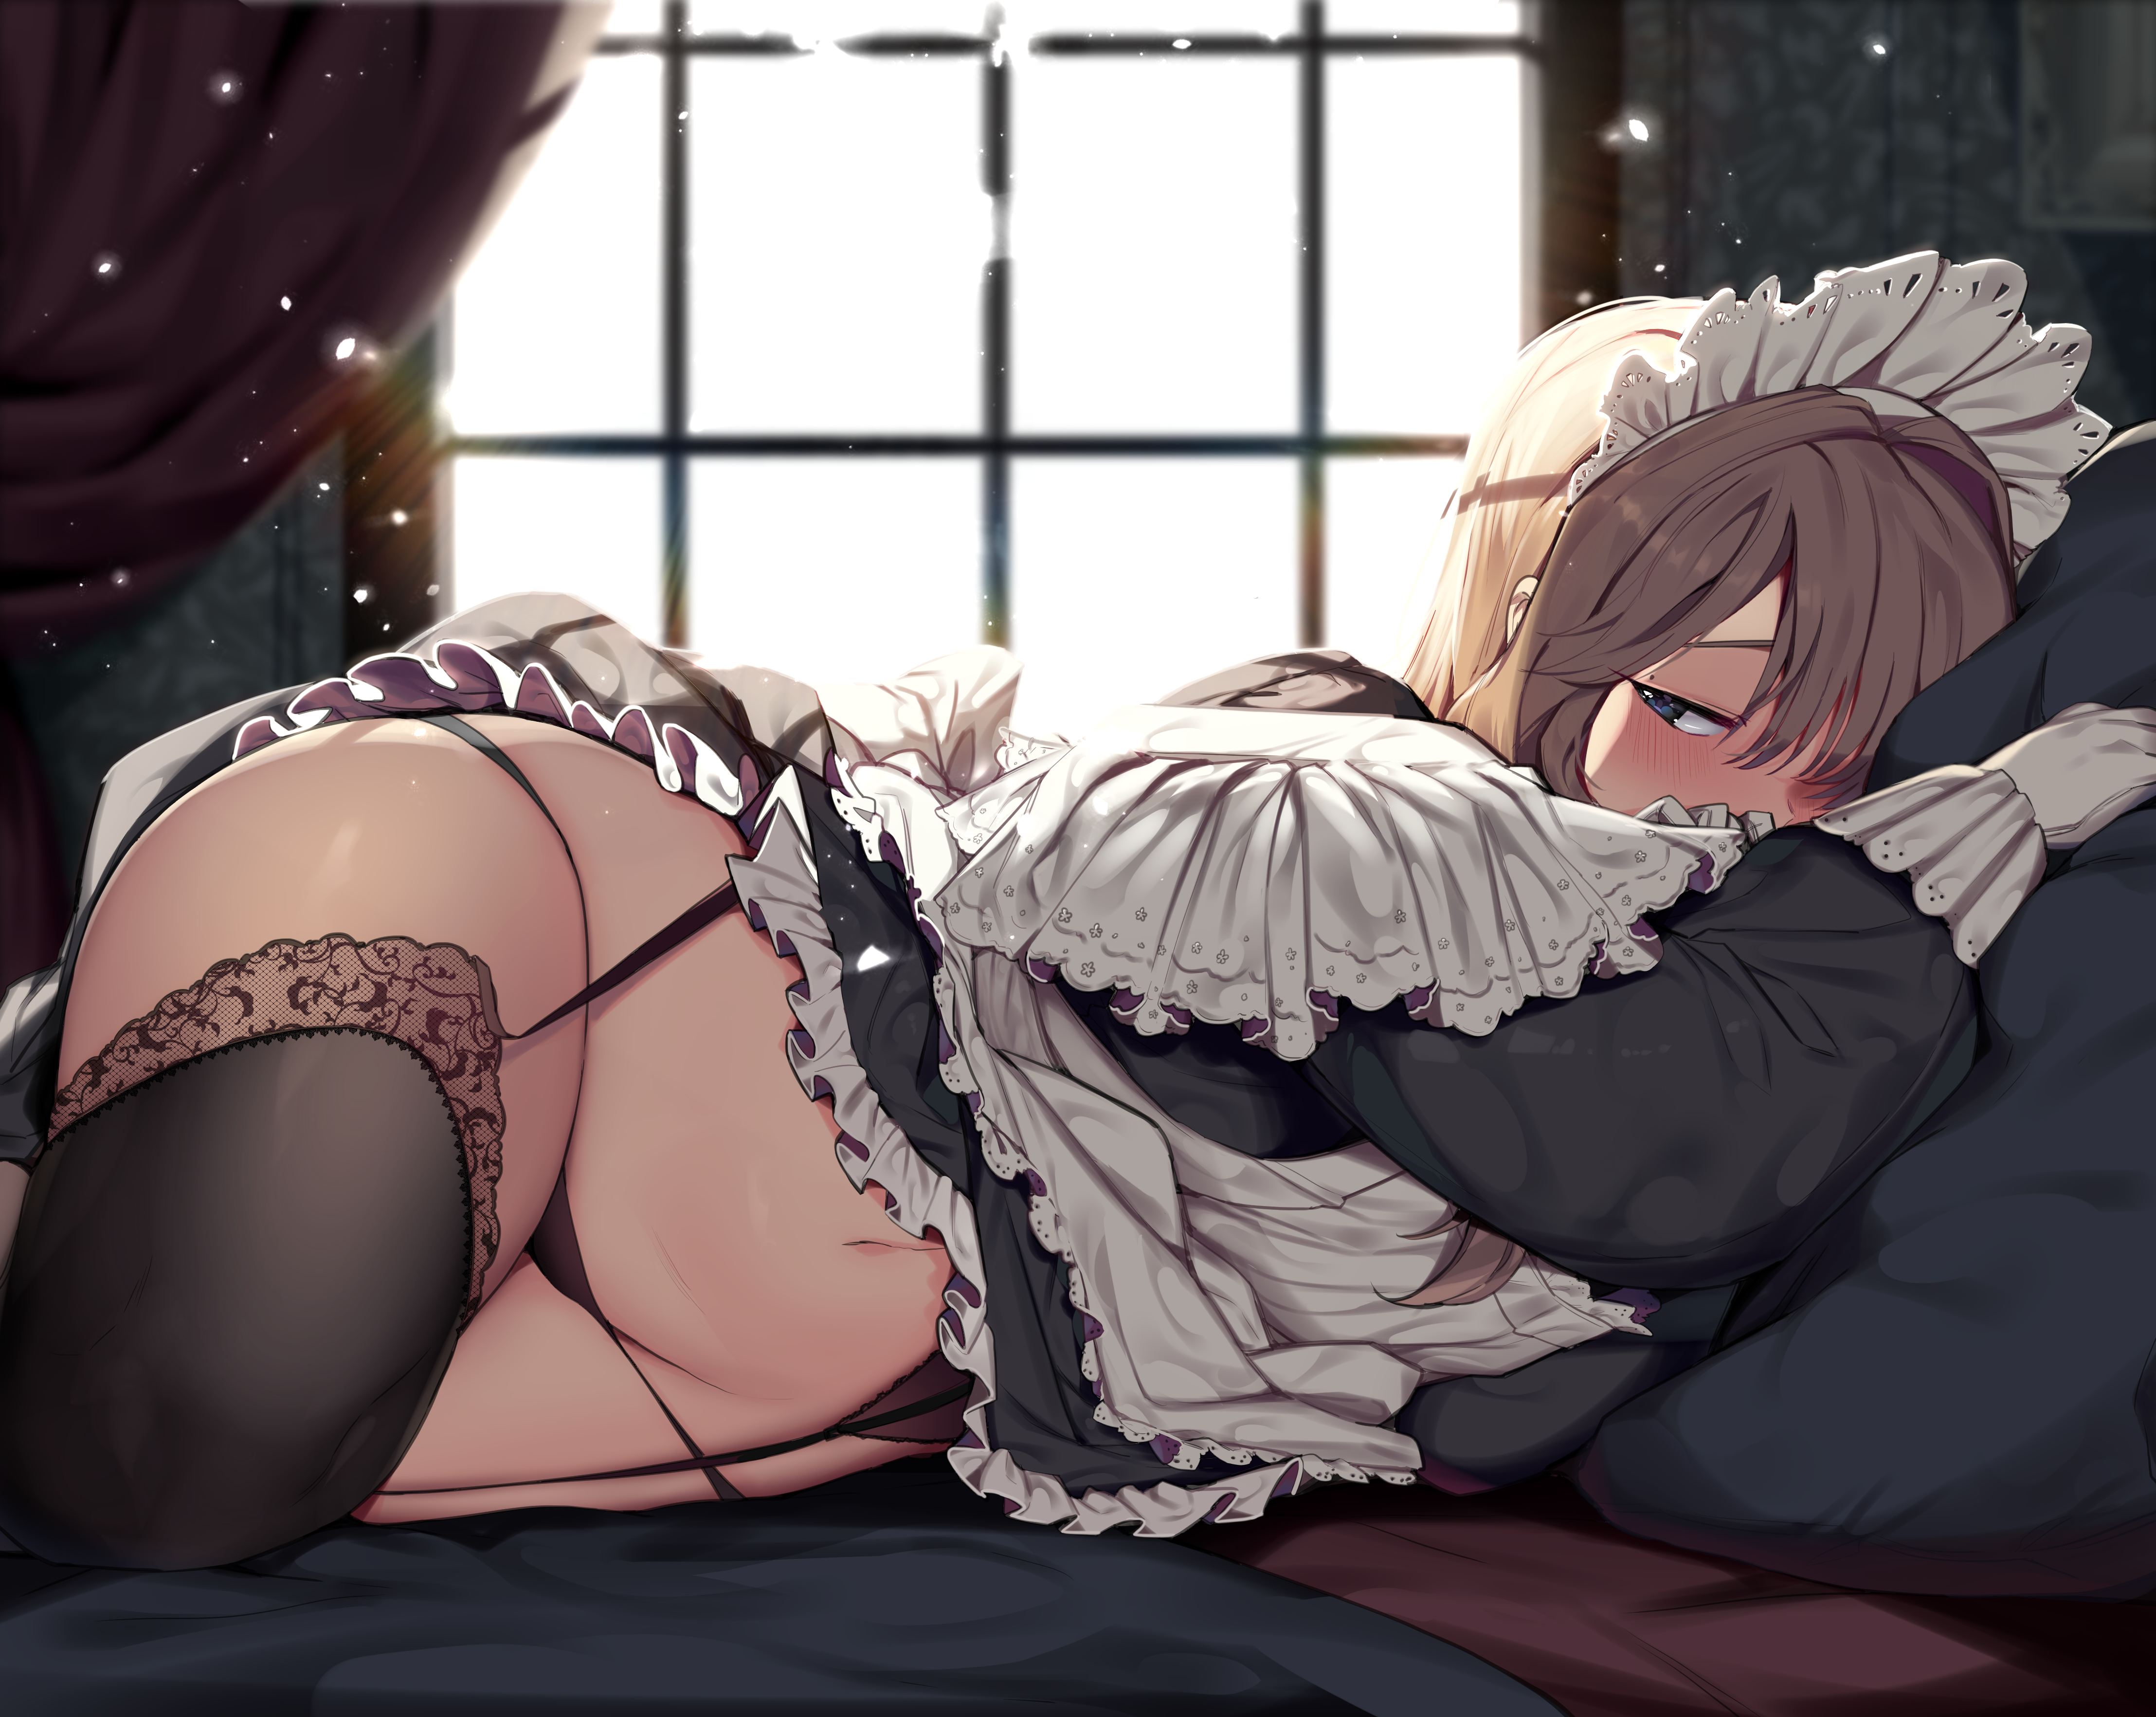 Anime 4431x3528 mendou kusai anime anime girls panties maid belly maid outfit 2D original characters ecchi in bed lifting skirt lying on side